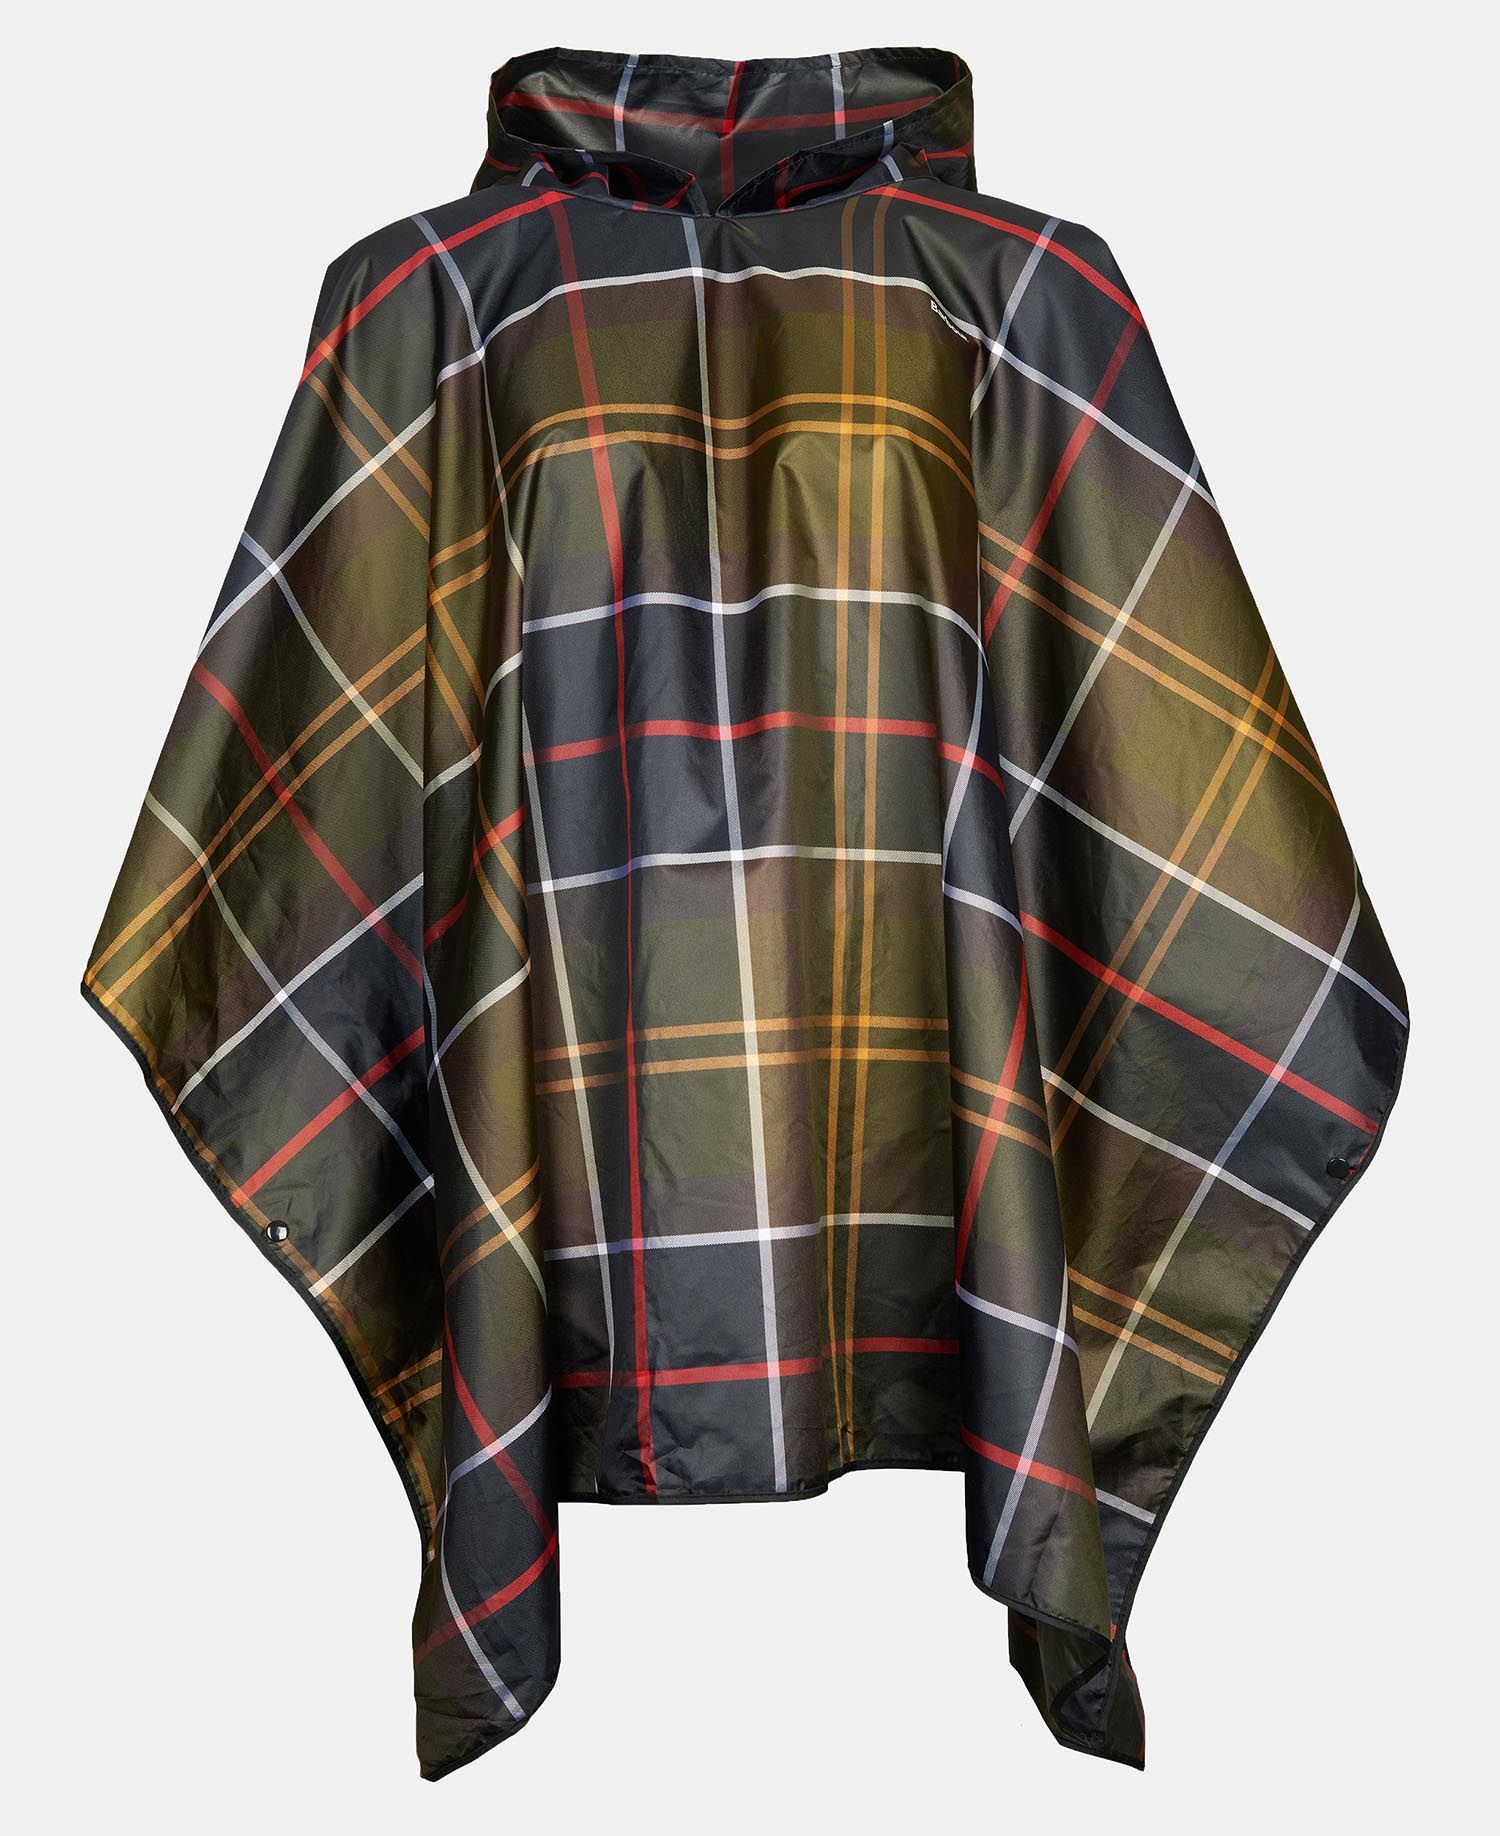 Barbour Showerproof Poncho - Classic